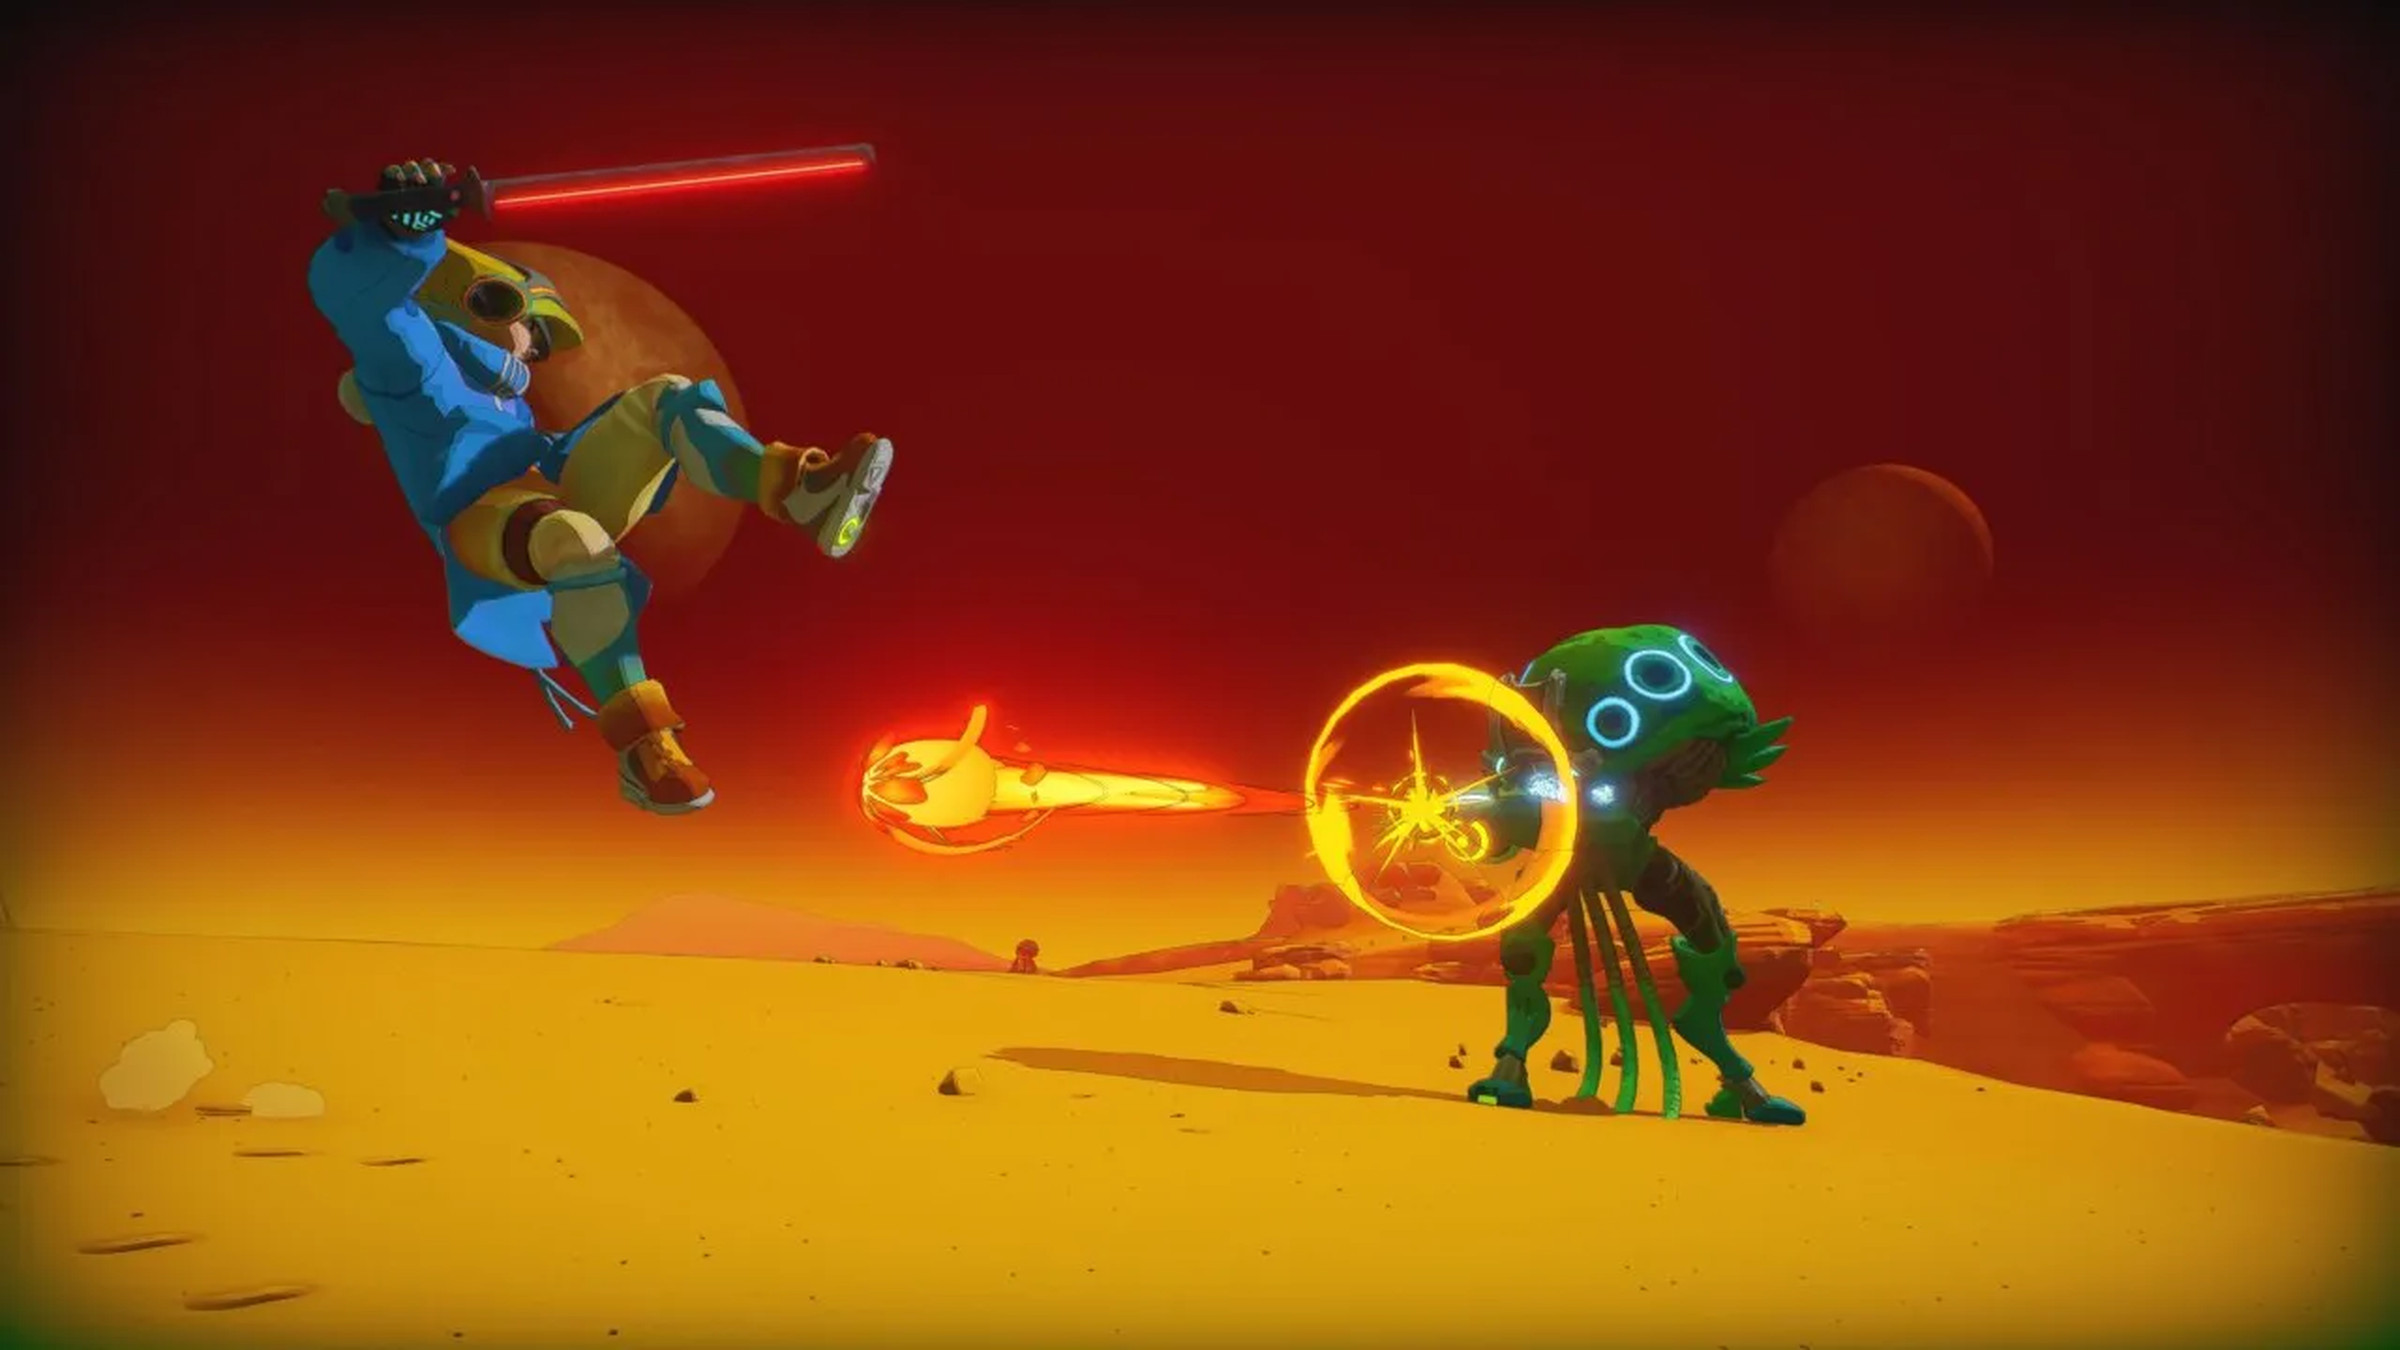 Screenshot from PixelJunk Raiders where a human player is dodging a laser bolt fired from a jellyfish like creature against a sandy landscape